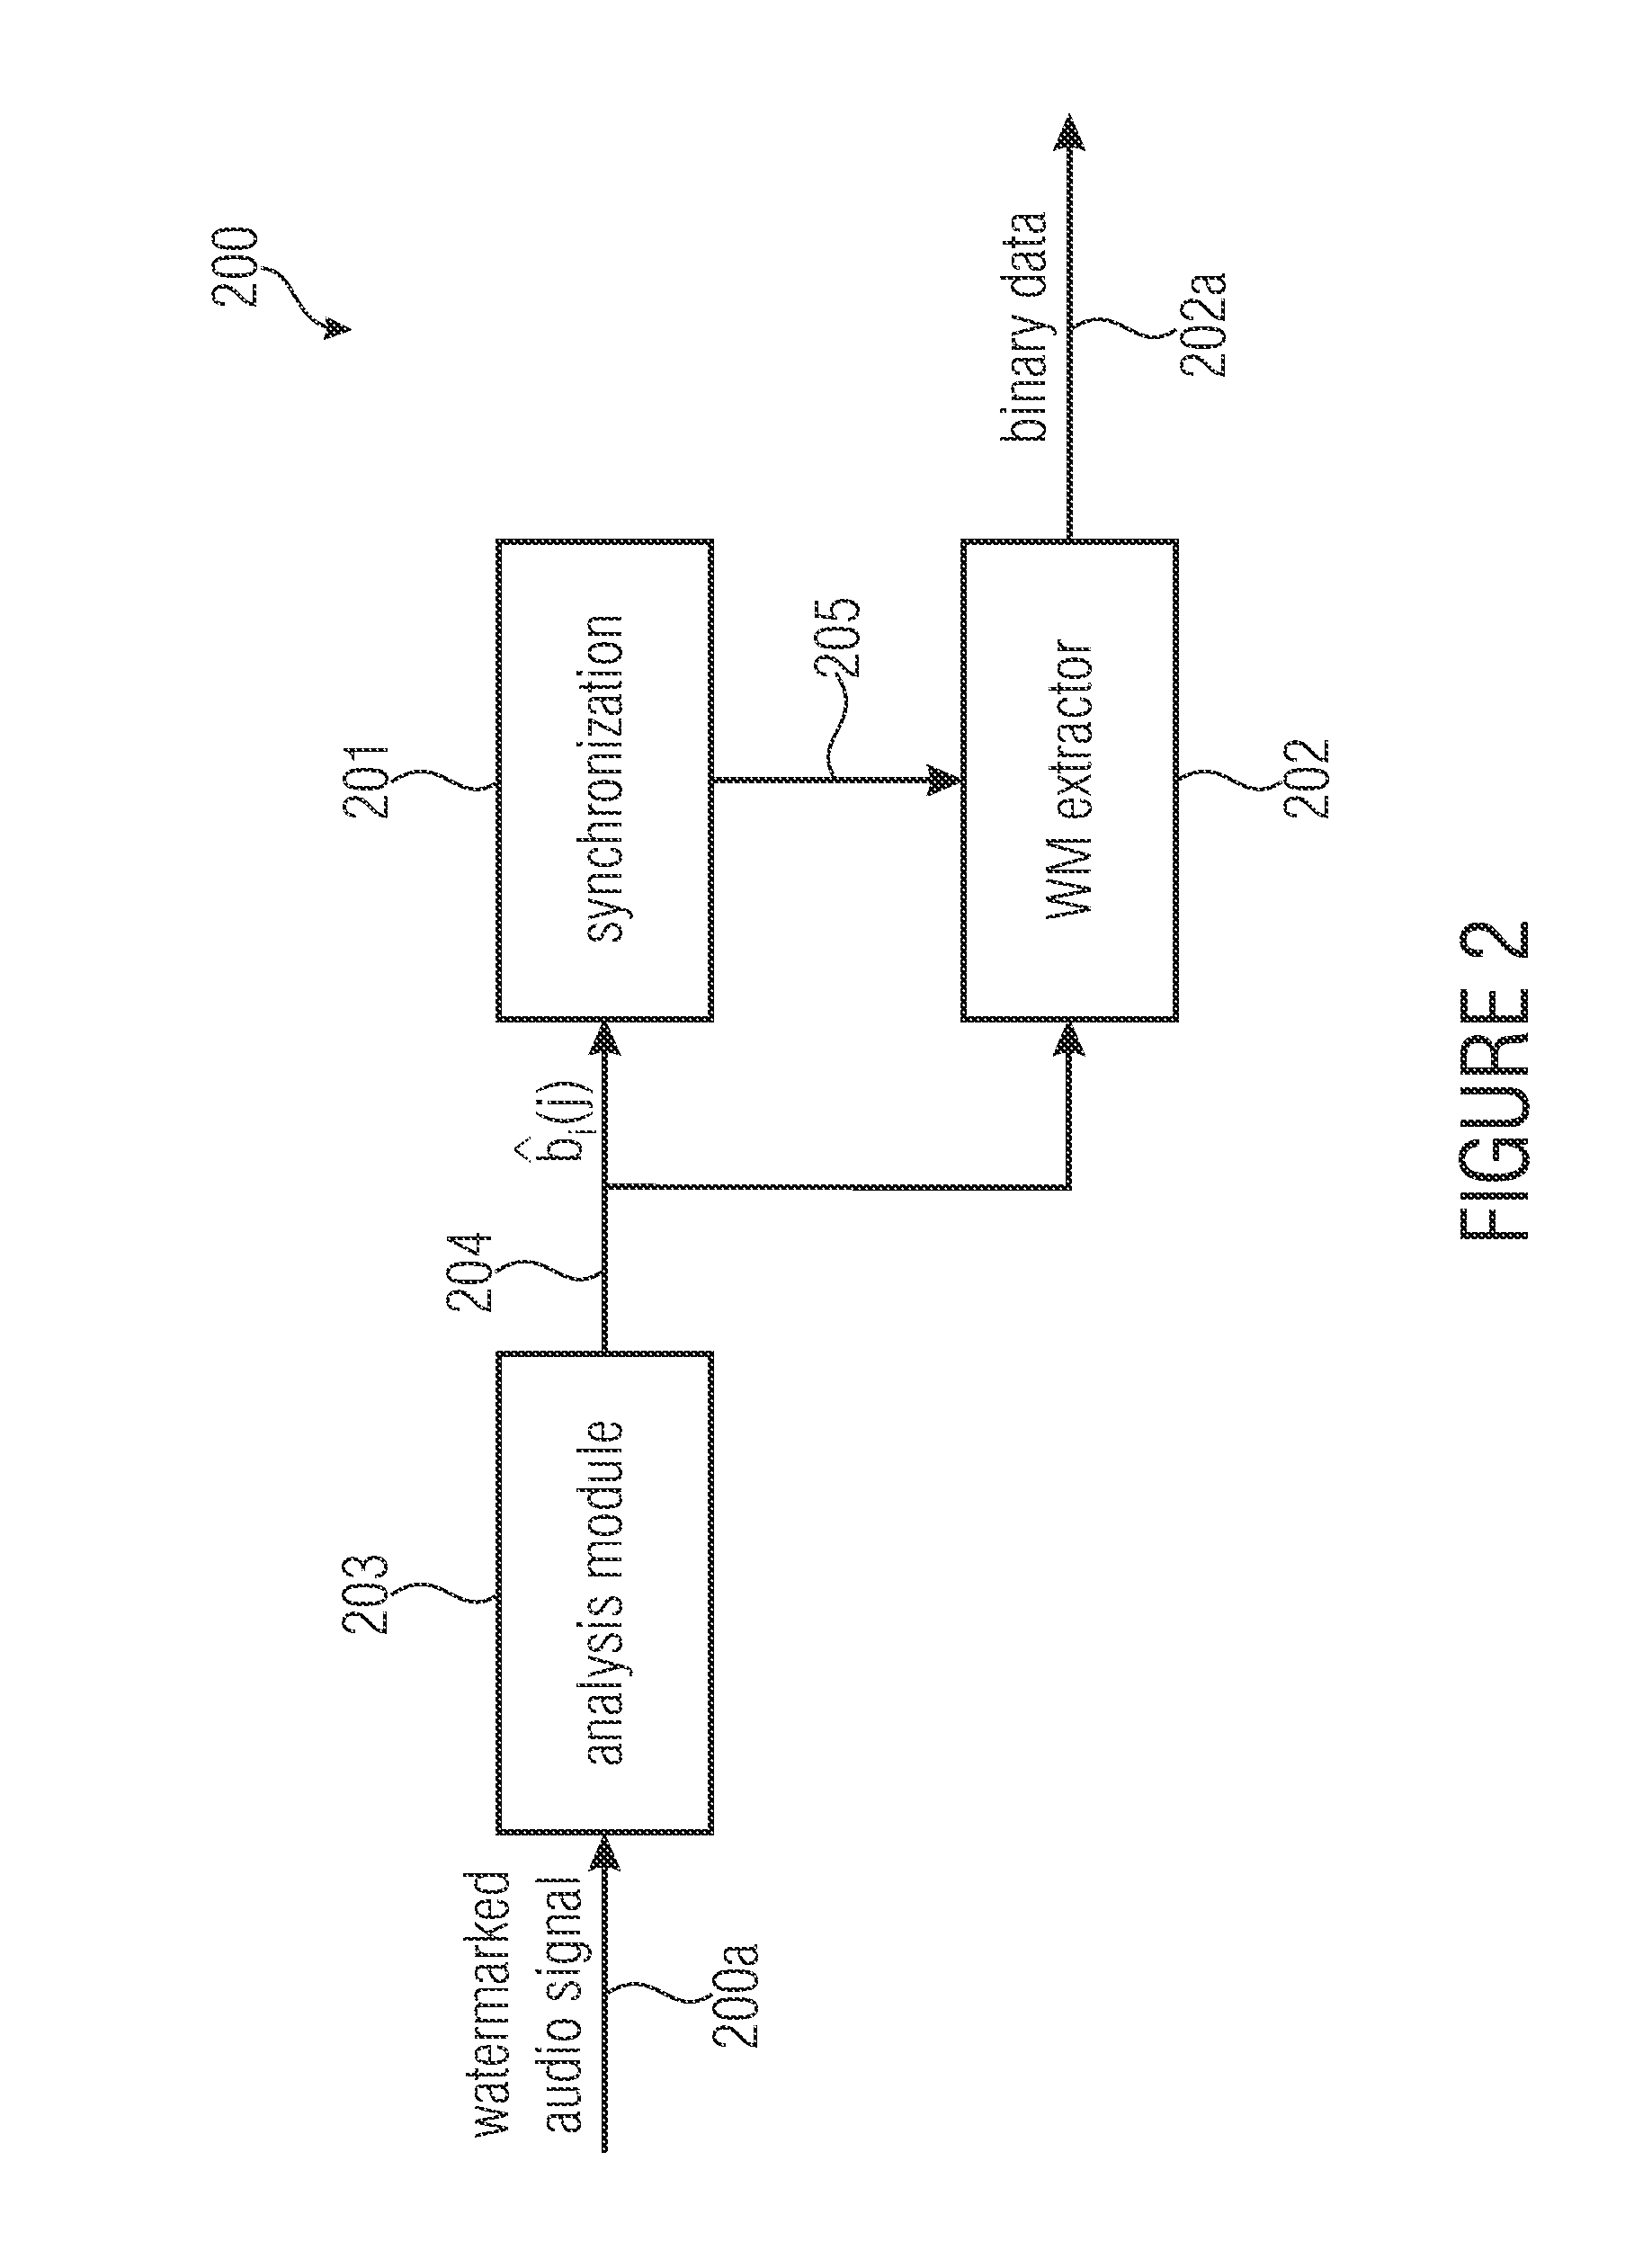 Watermark signal provider and method for providing a watermark signal